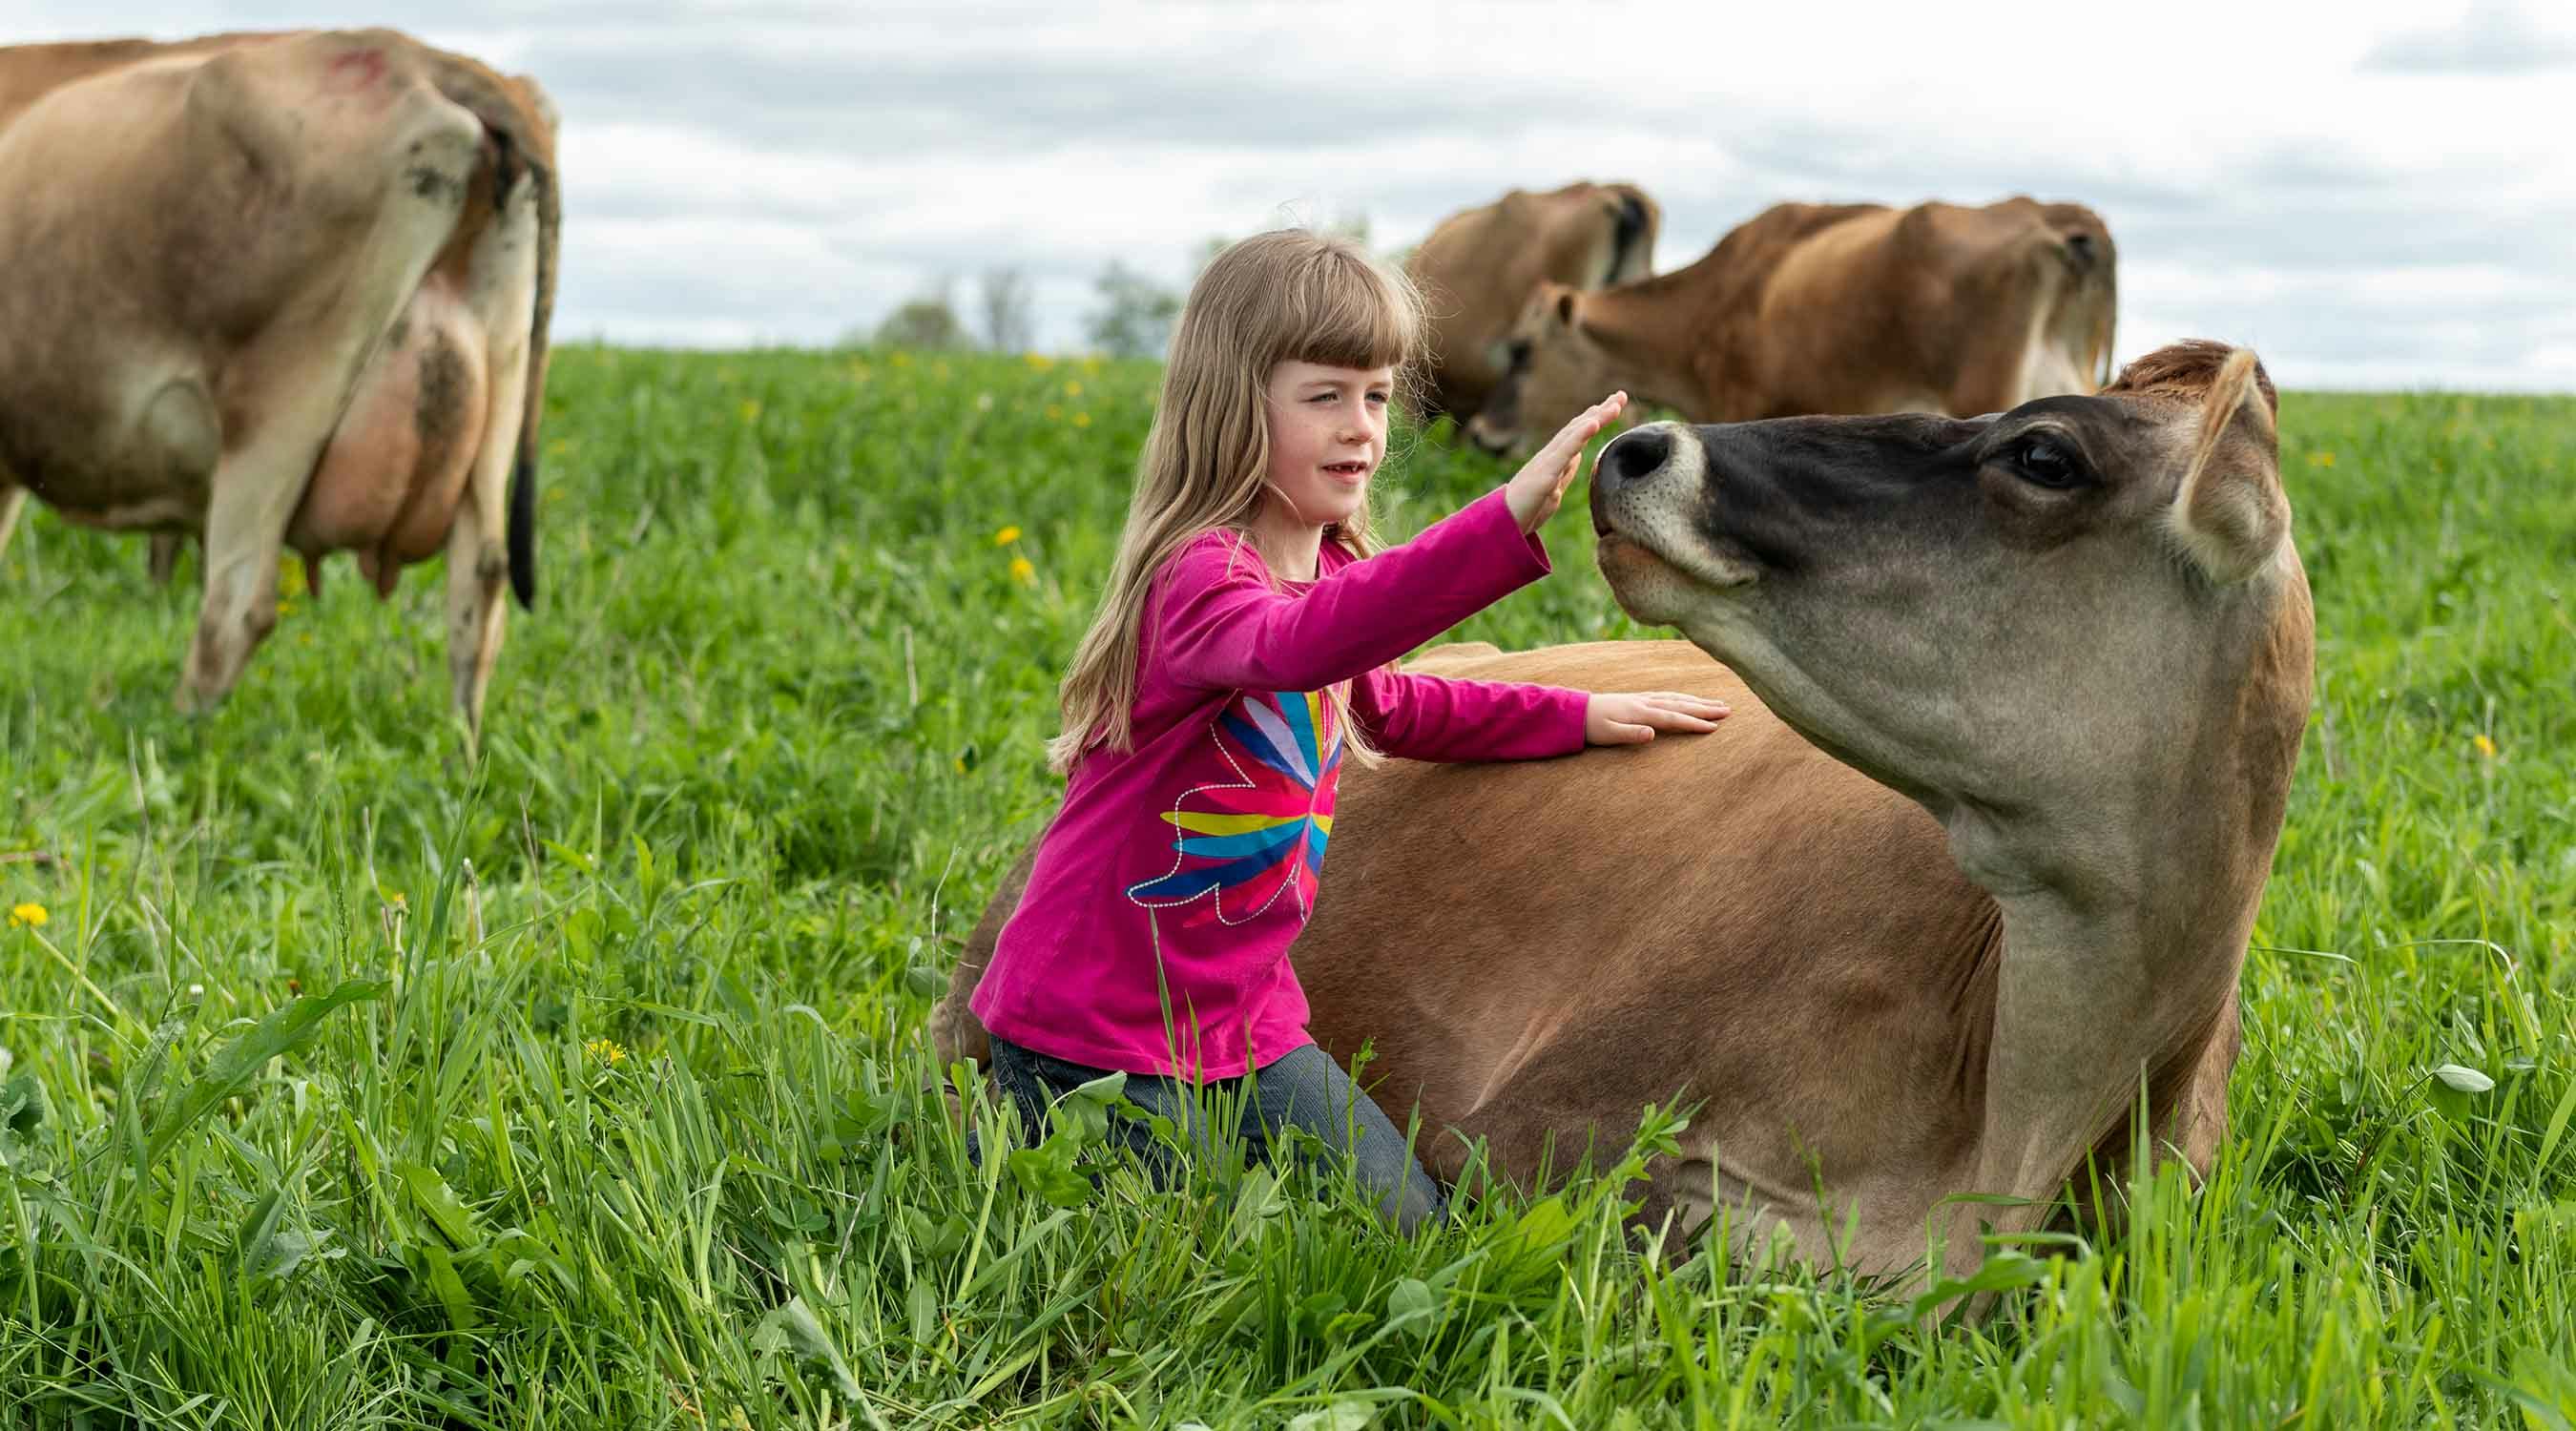 A cow and girl relax in a field at the Peake organic farm in Iowa